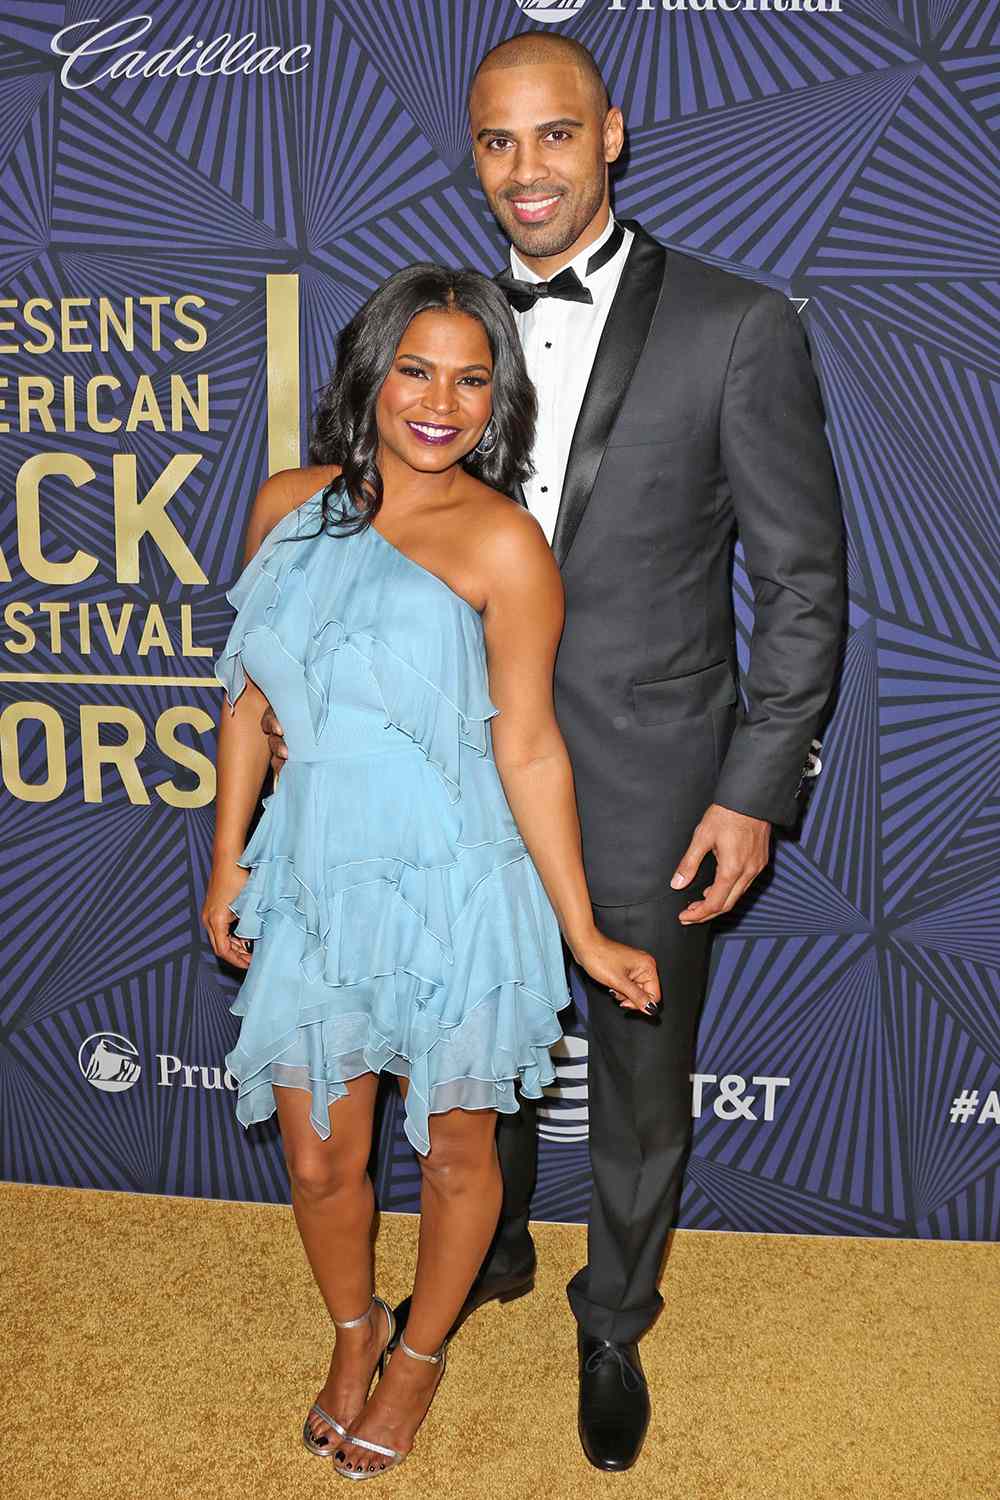 BEVERLY HILLS, CA - FEBRUARY 17: Actress Nia Long (L) and her Husband Ime Udoka (R) attend the BET's 2017 American Black Film Festival Honors Awards at The Beverly Hilton Hotel on February 17, 2017 in Beverly Hills, California. (Photo by Paul Archuleta/FilmMagic)